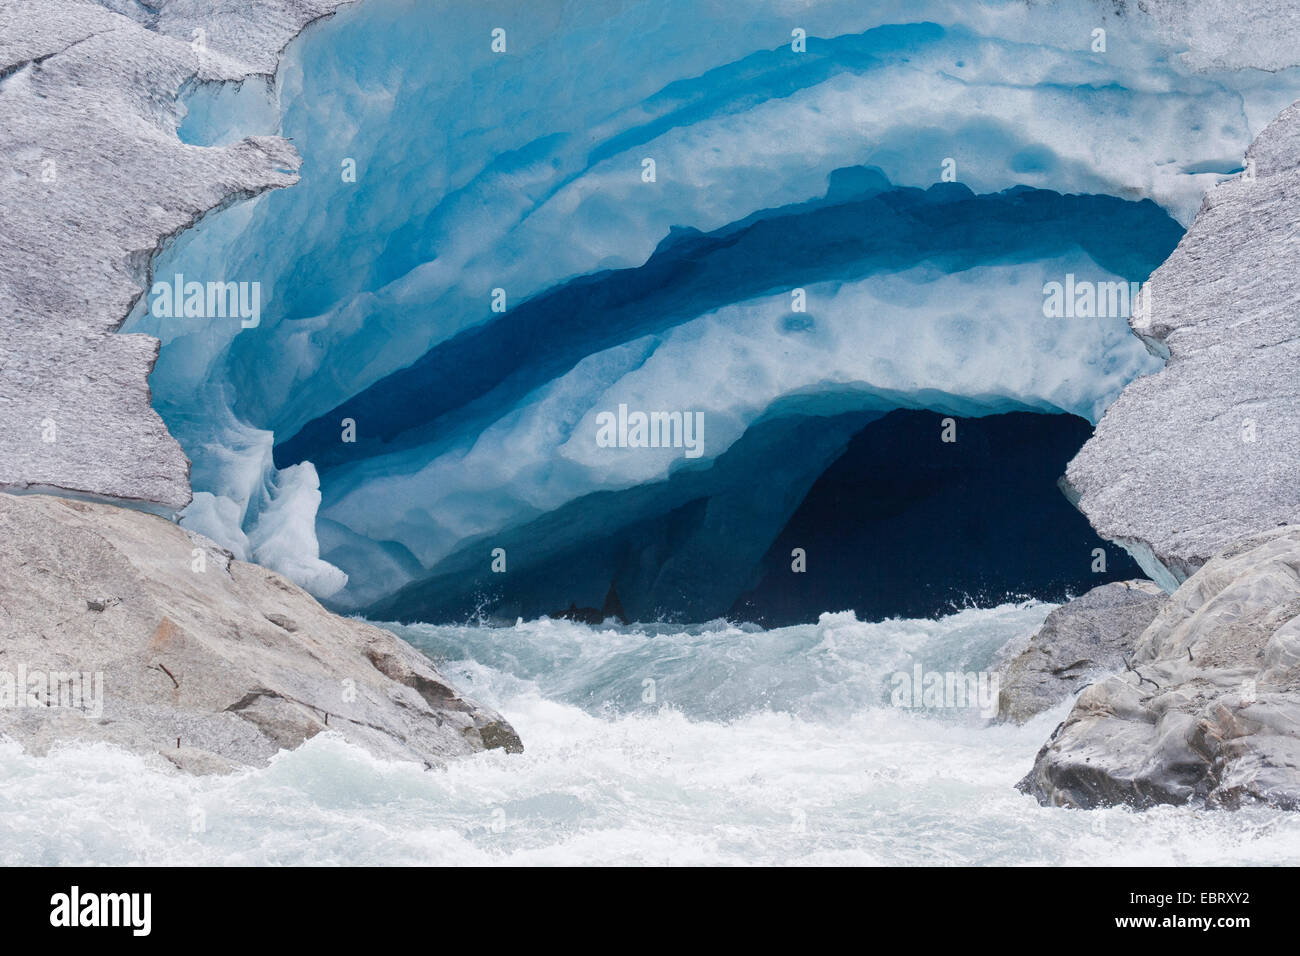 melt water leaking out of glacier snout of Nigardsbreen, a glacier arm of Jostedalsbreen glacier, Norway, Jostedalsbreen National Park Stock Photo